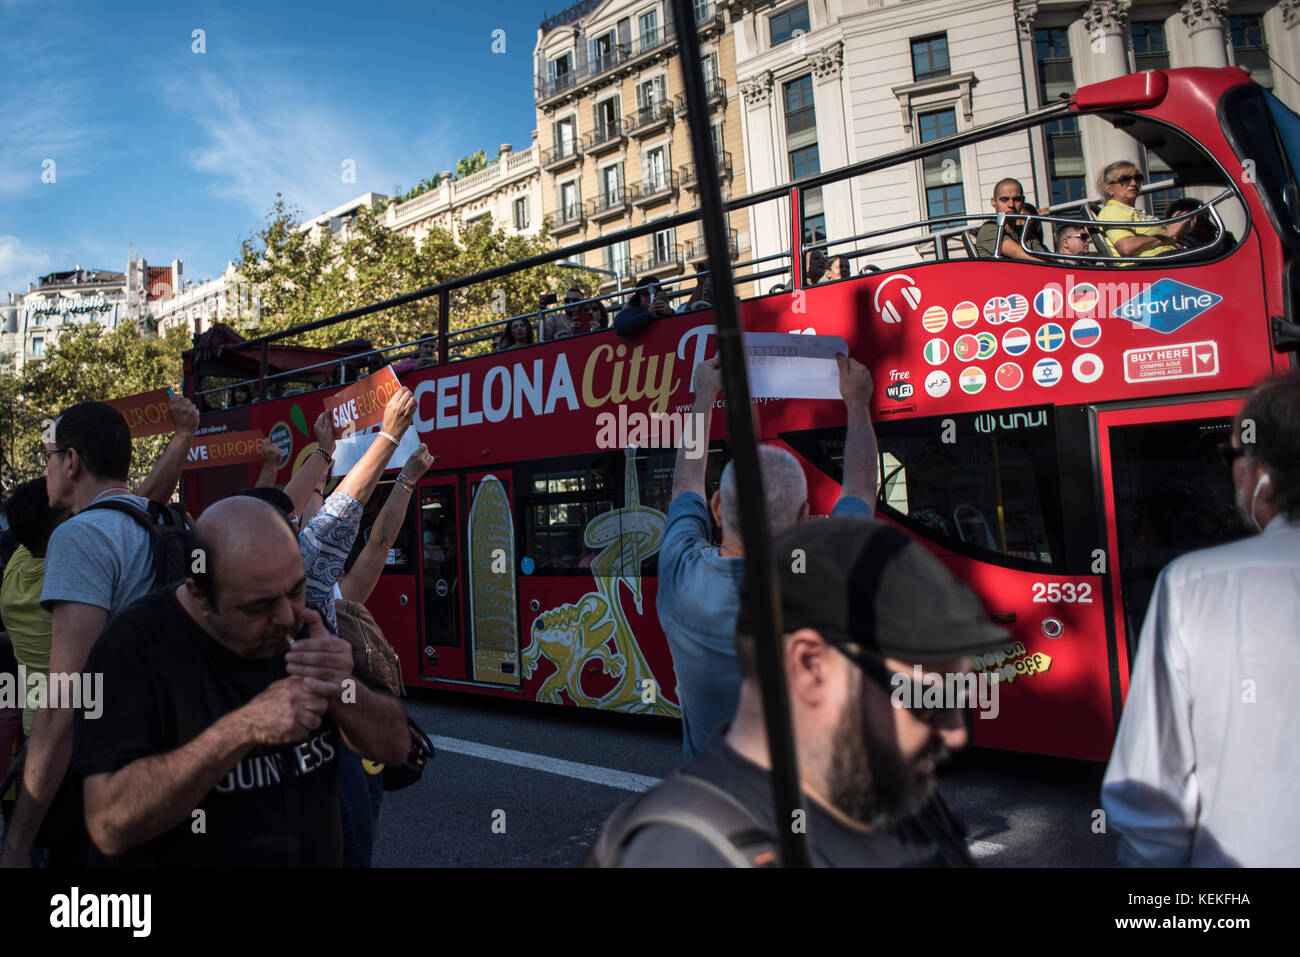 Barcelona, Spain. 21st October, 2017. Barcelona. protesters shows Save Europe posters to tourists in the rally against the imprisonment of the Catalan leaders Jordi Sánchez (ANC) and Jordi Cuixart (Òmnium Cultural) and the intervention of the Spanish State in the Government of Catalonia. The Government of Spain has announced the intervention of Catalan self-government through Article 155 of the Constitution, never used before. All the main members of the Catalan government have attended the demonstration to demand the withdrawal of the government of Madrid. Credit: Alamy / Carles Desfilis Stock Photo